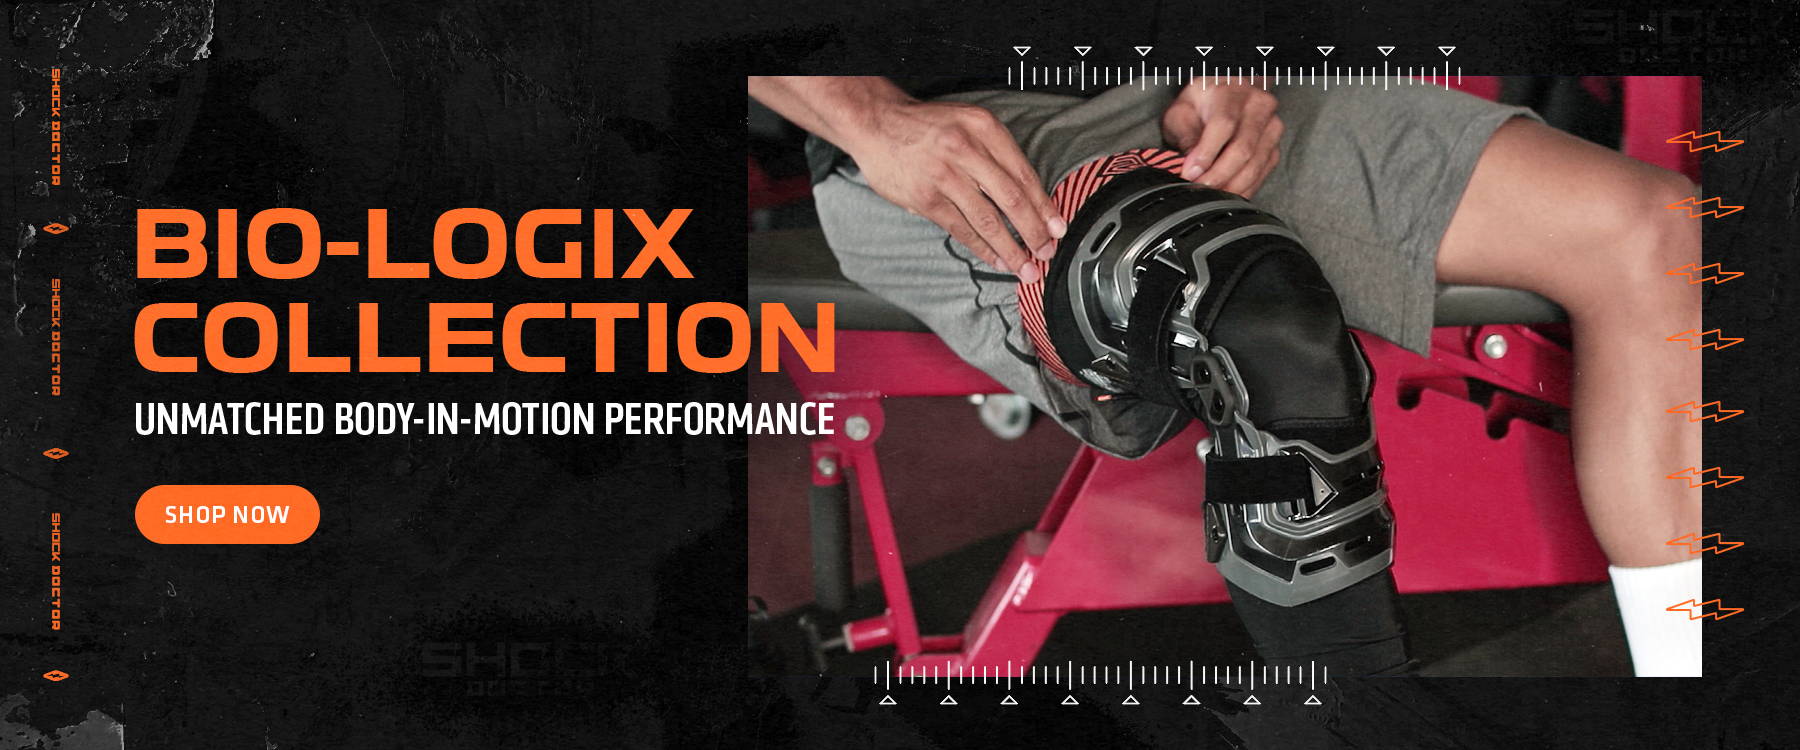 Bio-Logix Collection. Unmatched Body-in-Motion Performance